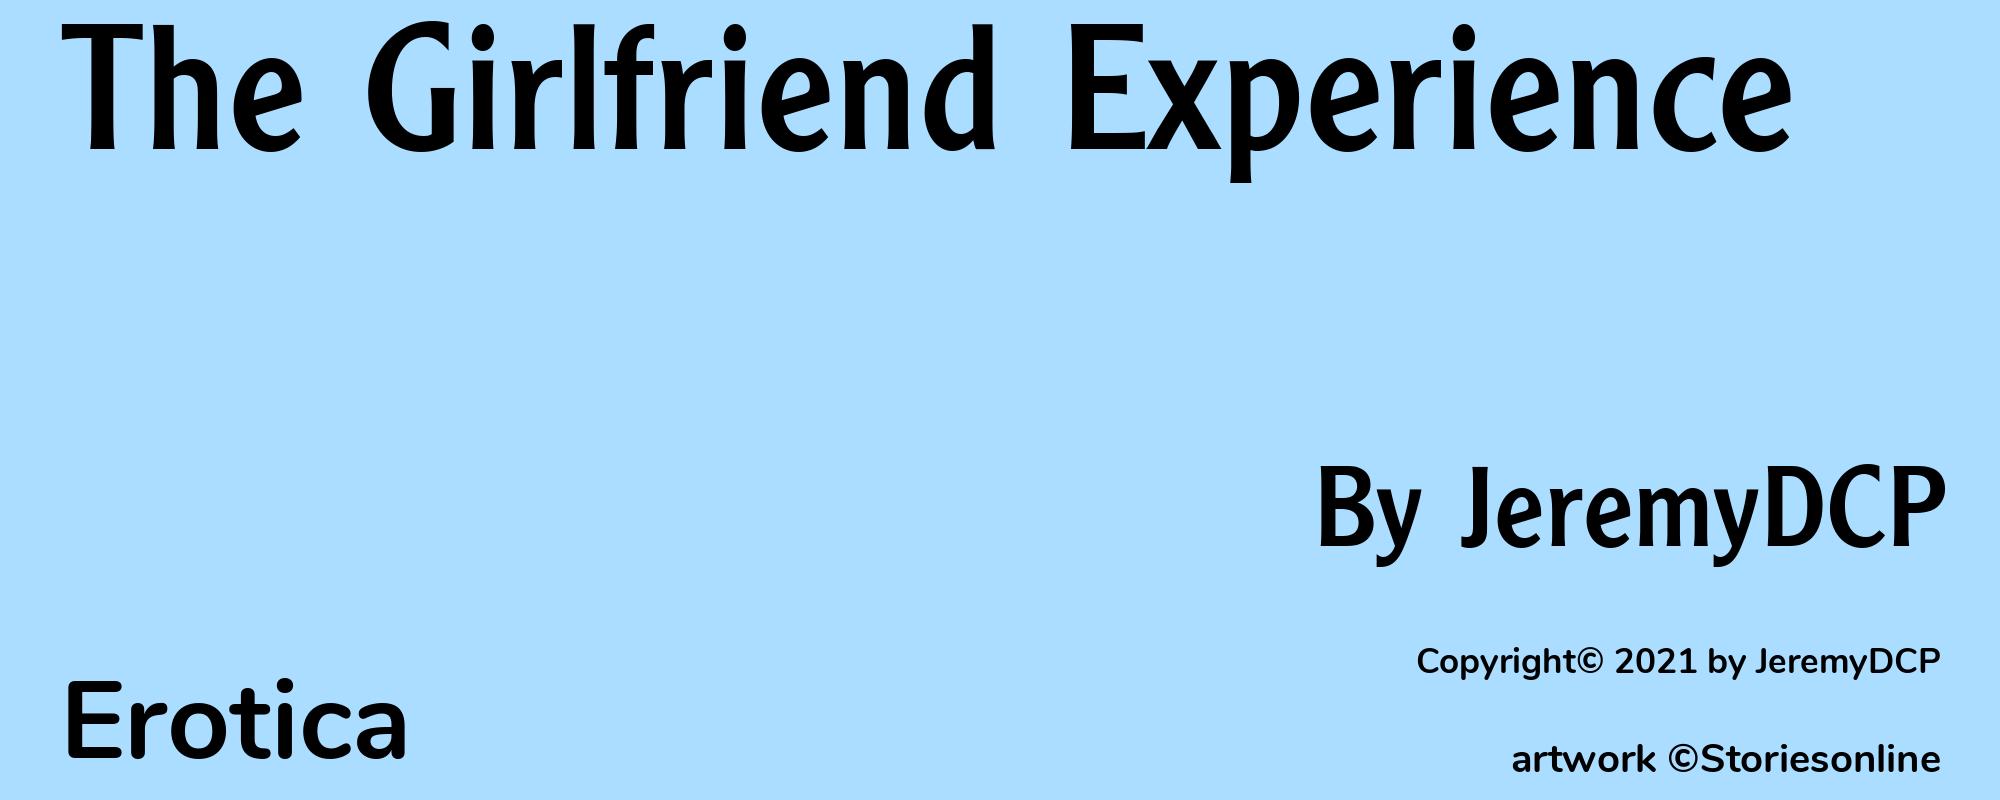 The Girlfriend Experience - Cover